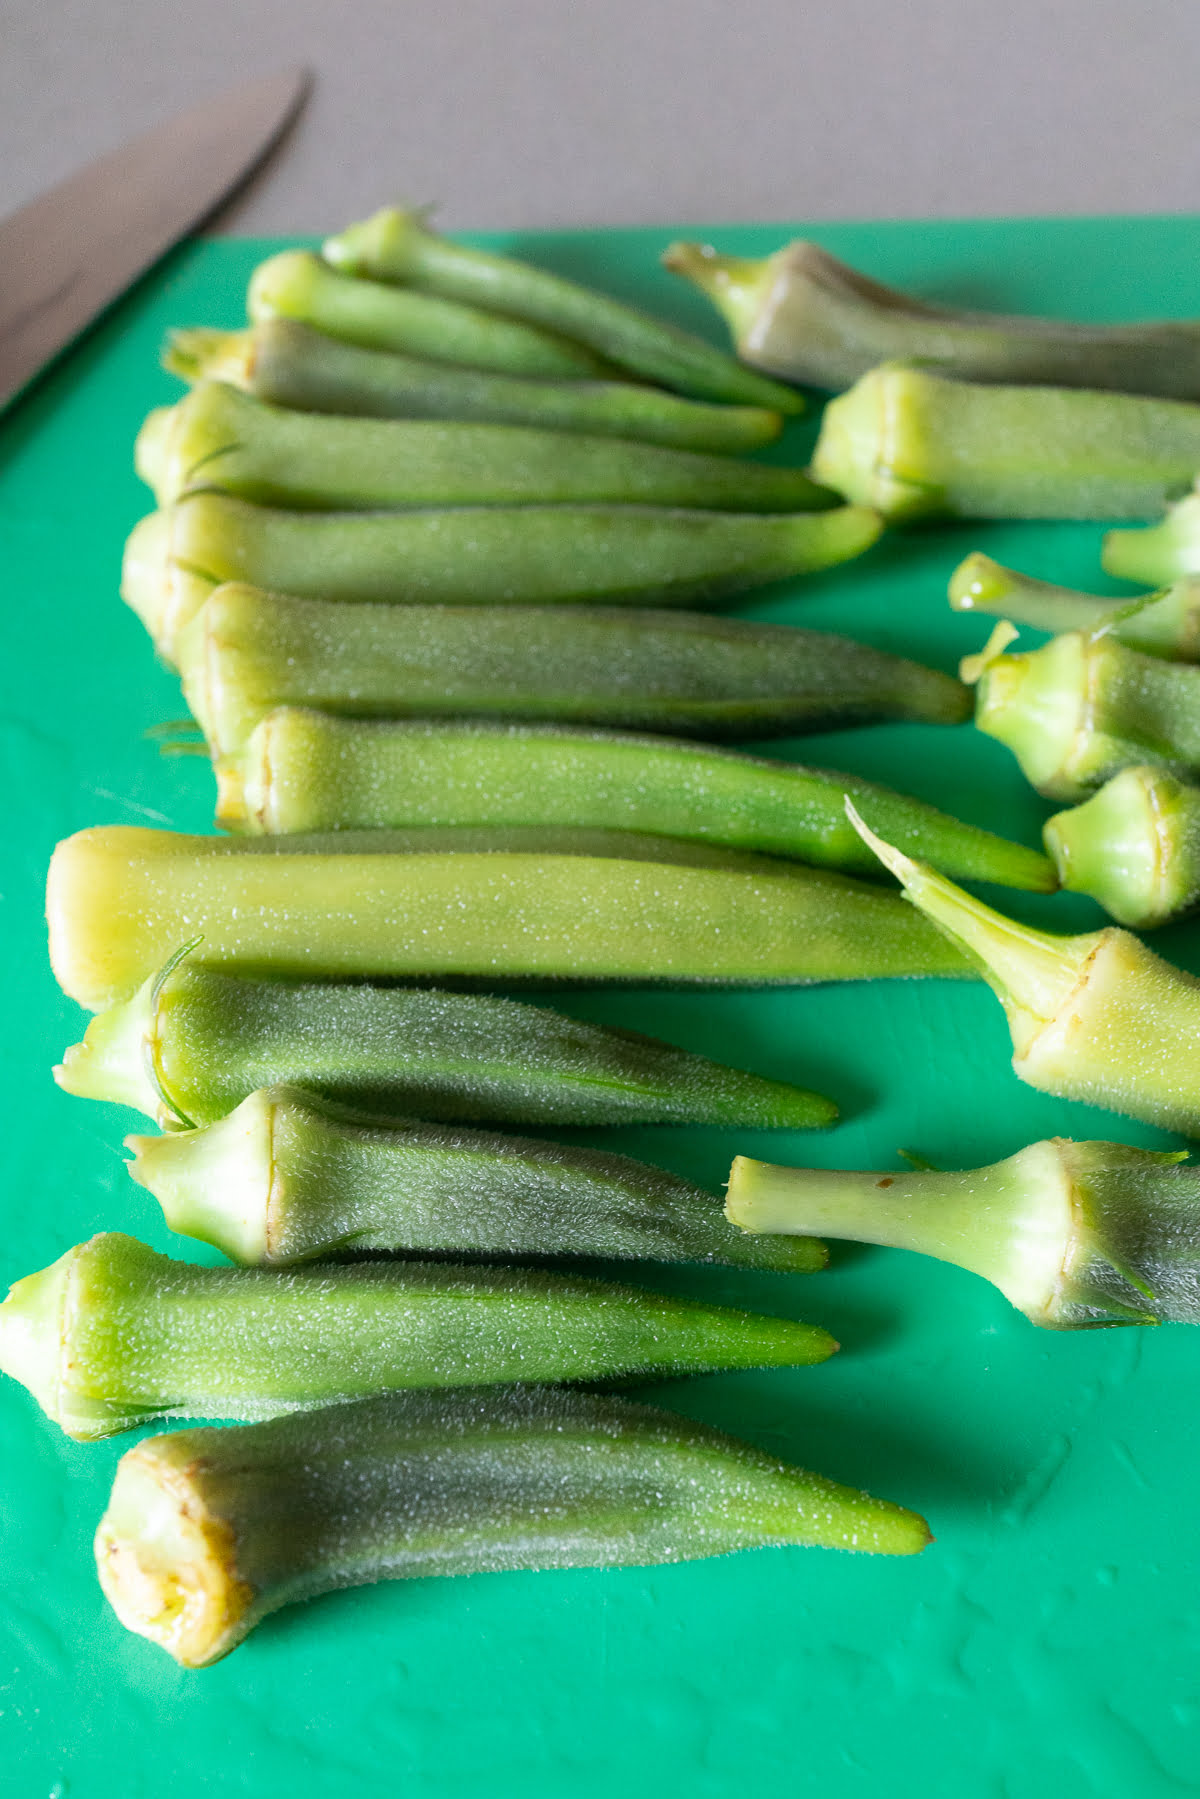 A pile of fresh okra, just boiled